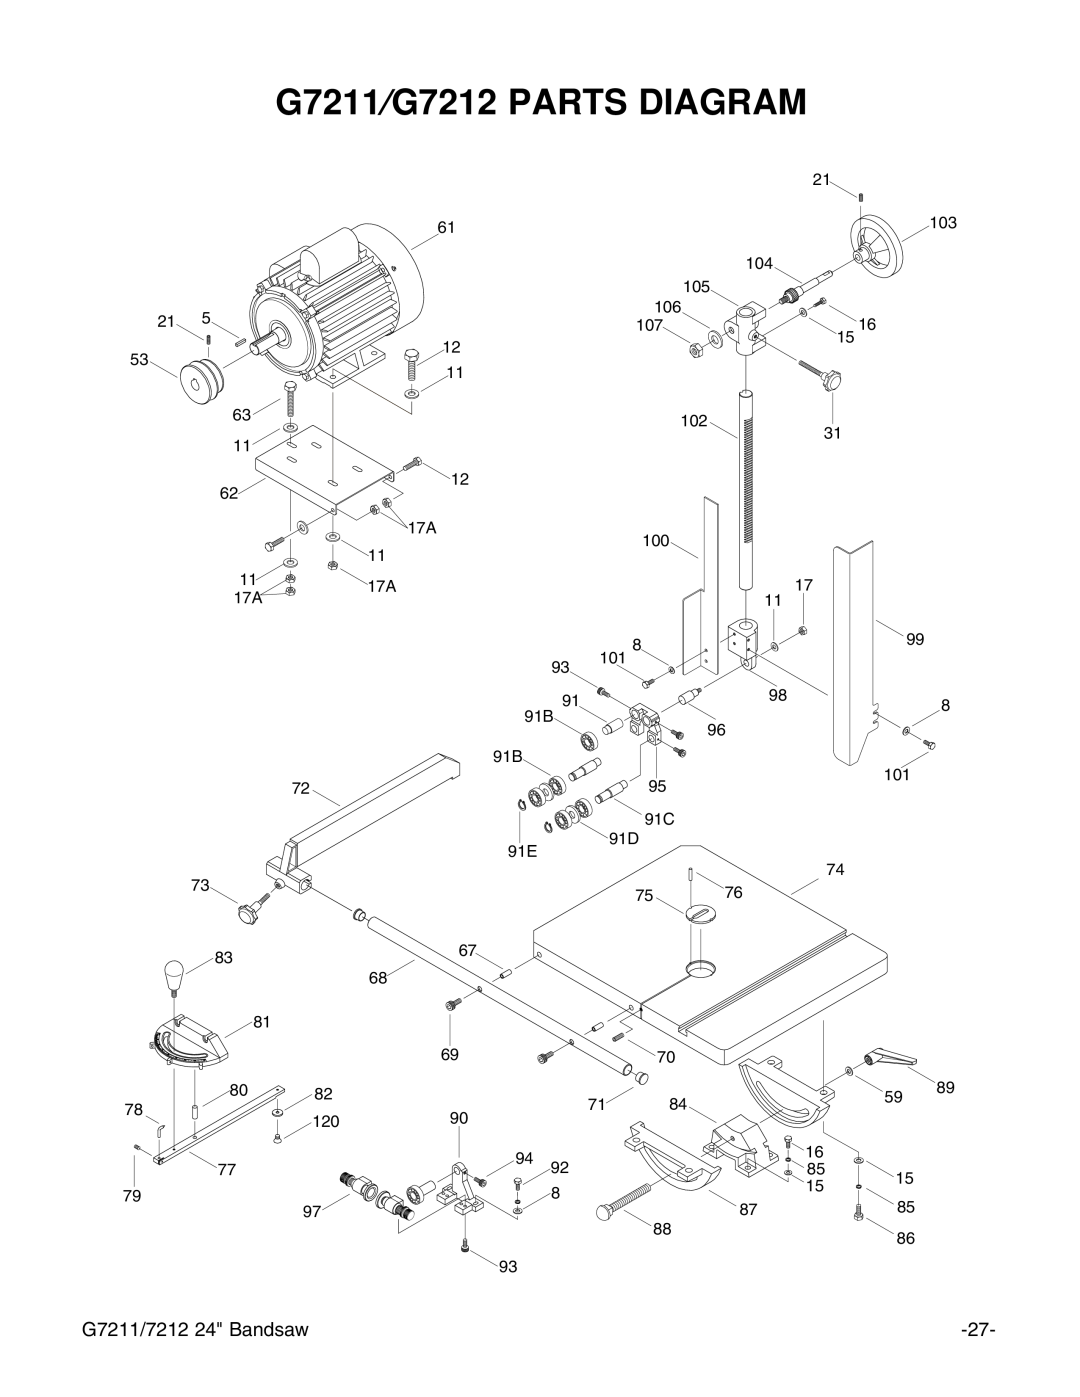 Grizzly instruction manual G7211⁄G7212 PARTS DIAGRAM, G7211/7212 24 Bandsaw 